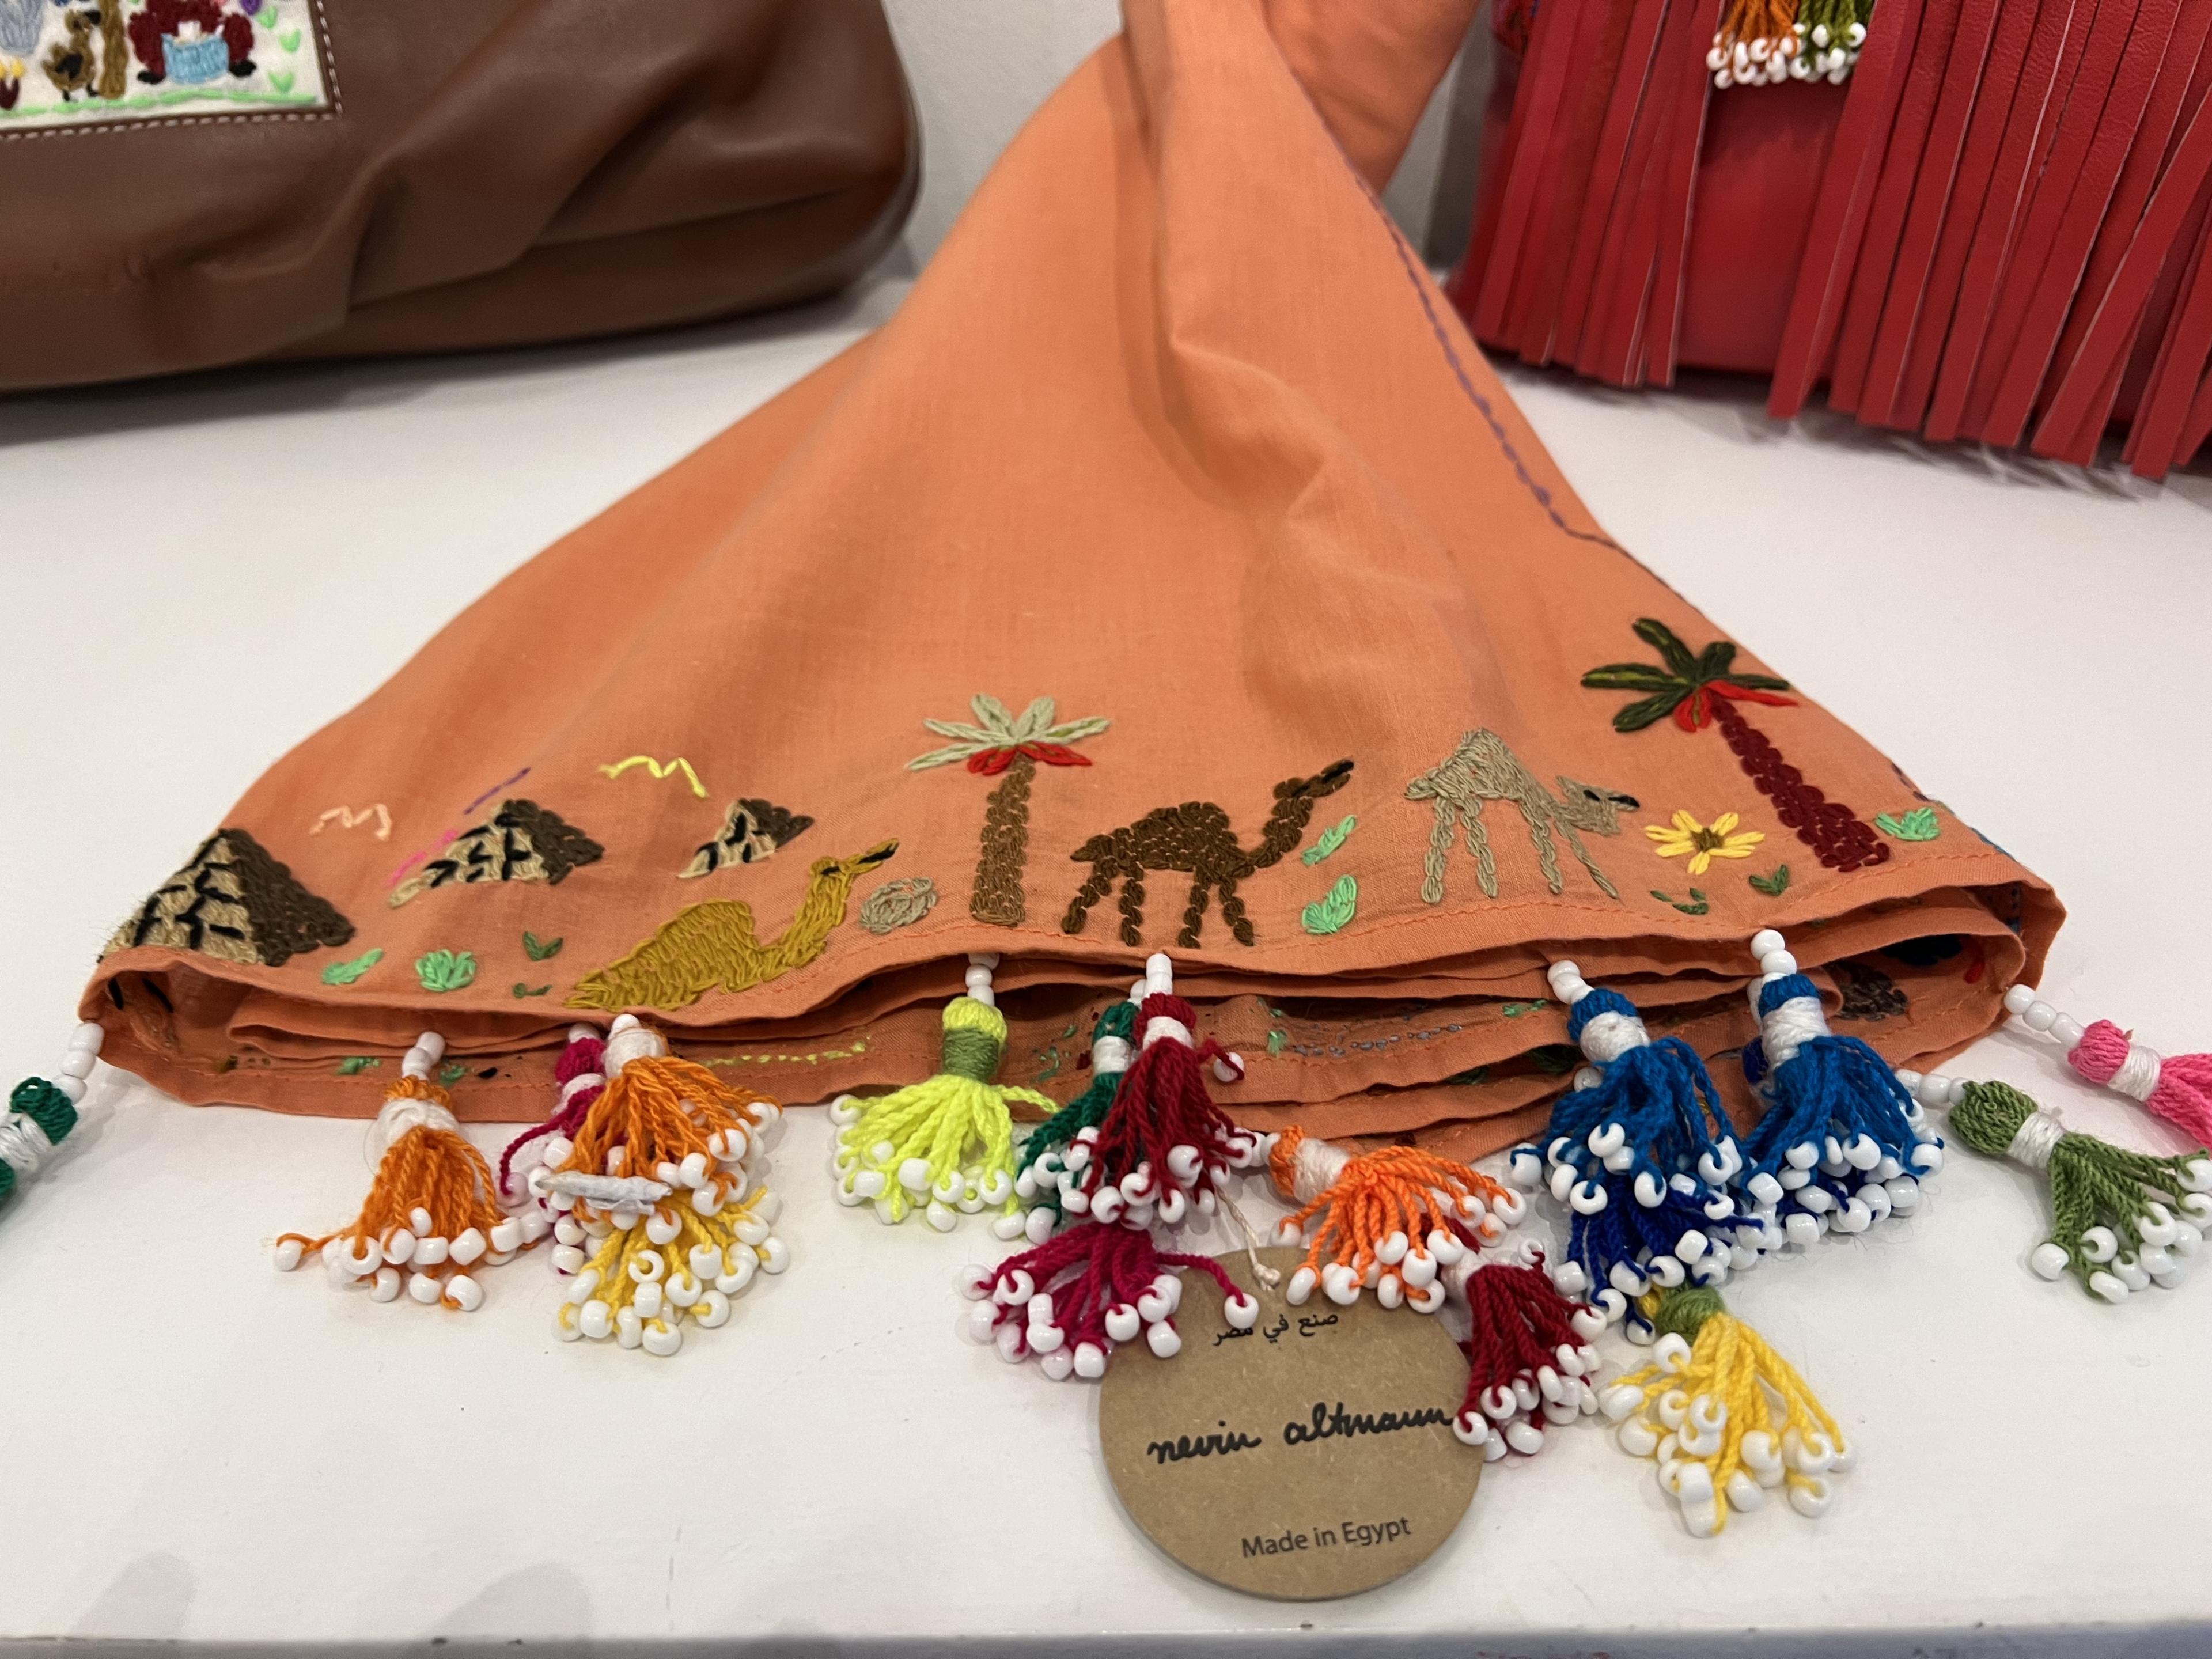 Embroidered orange fabric displaying camels, palm trees and pyramids 